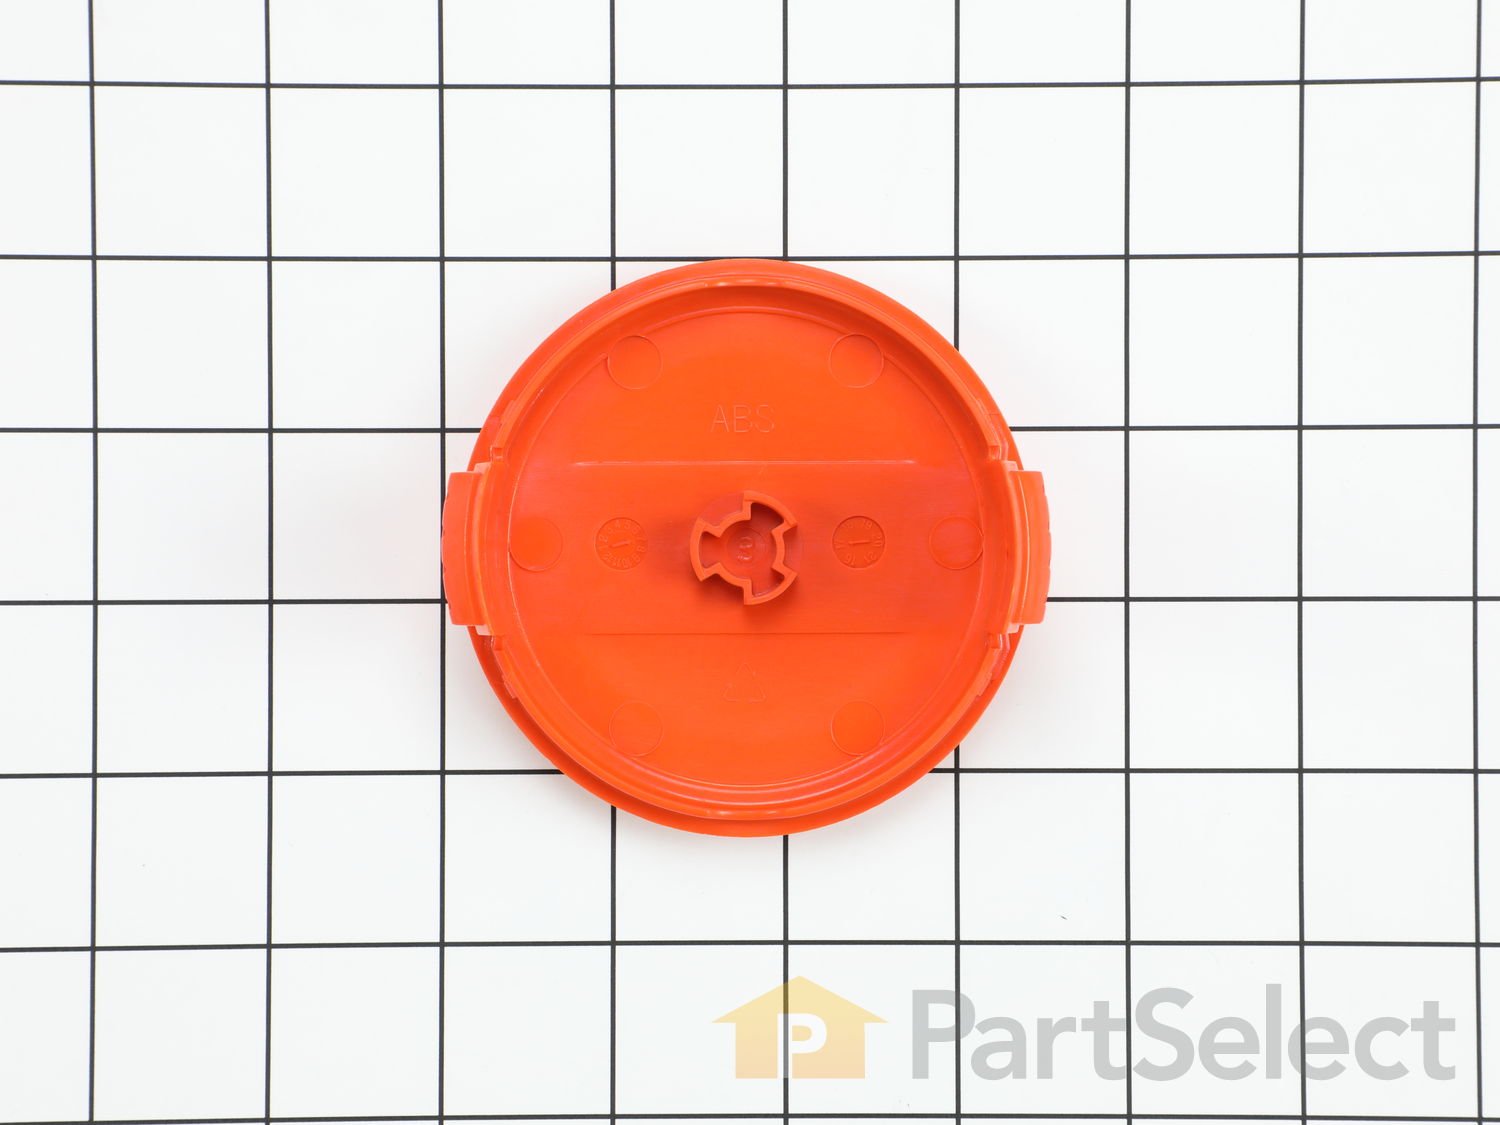 Black & Decker OEM 385022-03n Replacement String Trimmer Cover Gh900 LST300